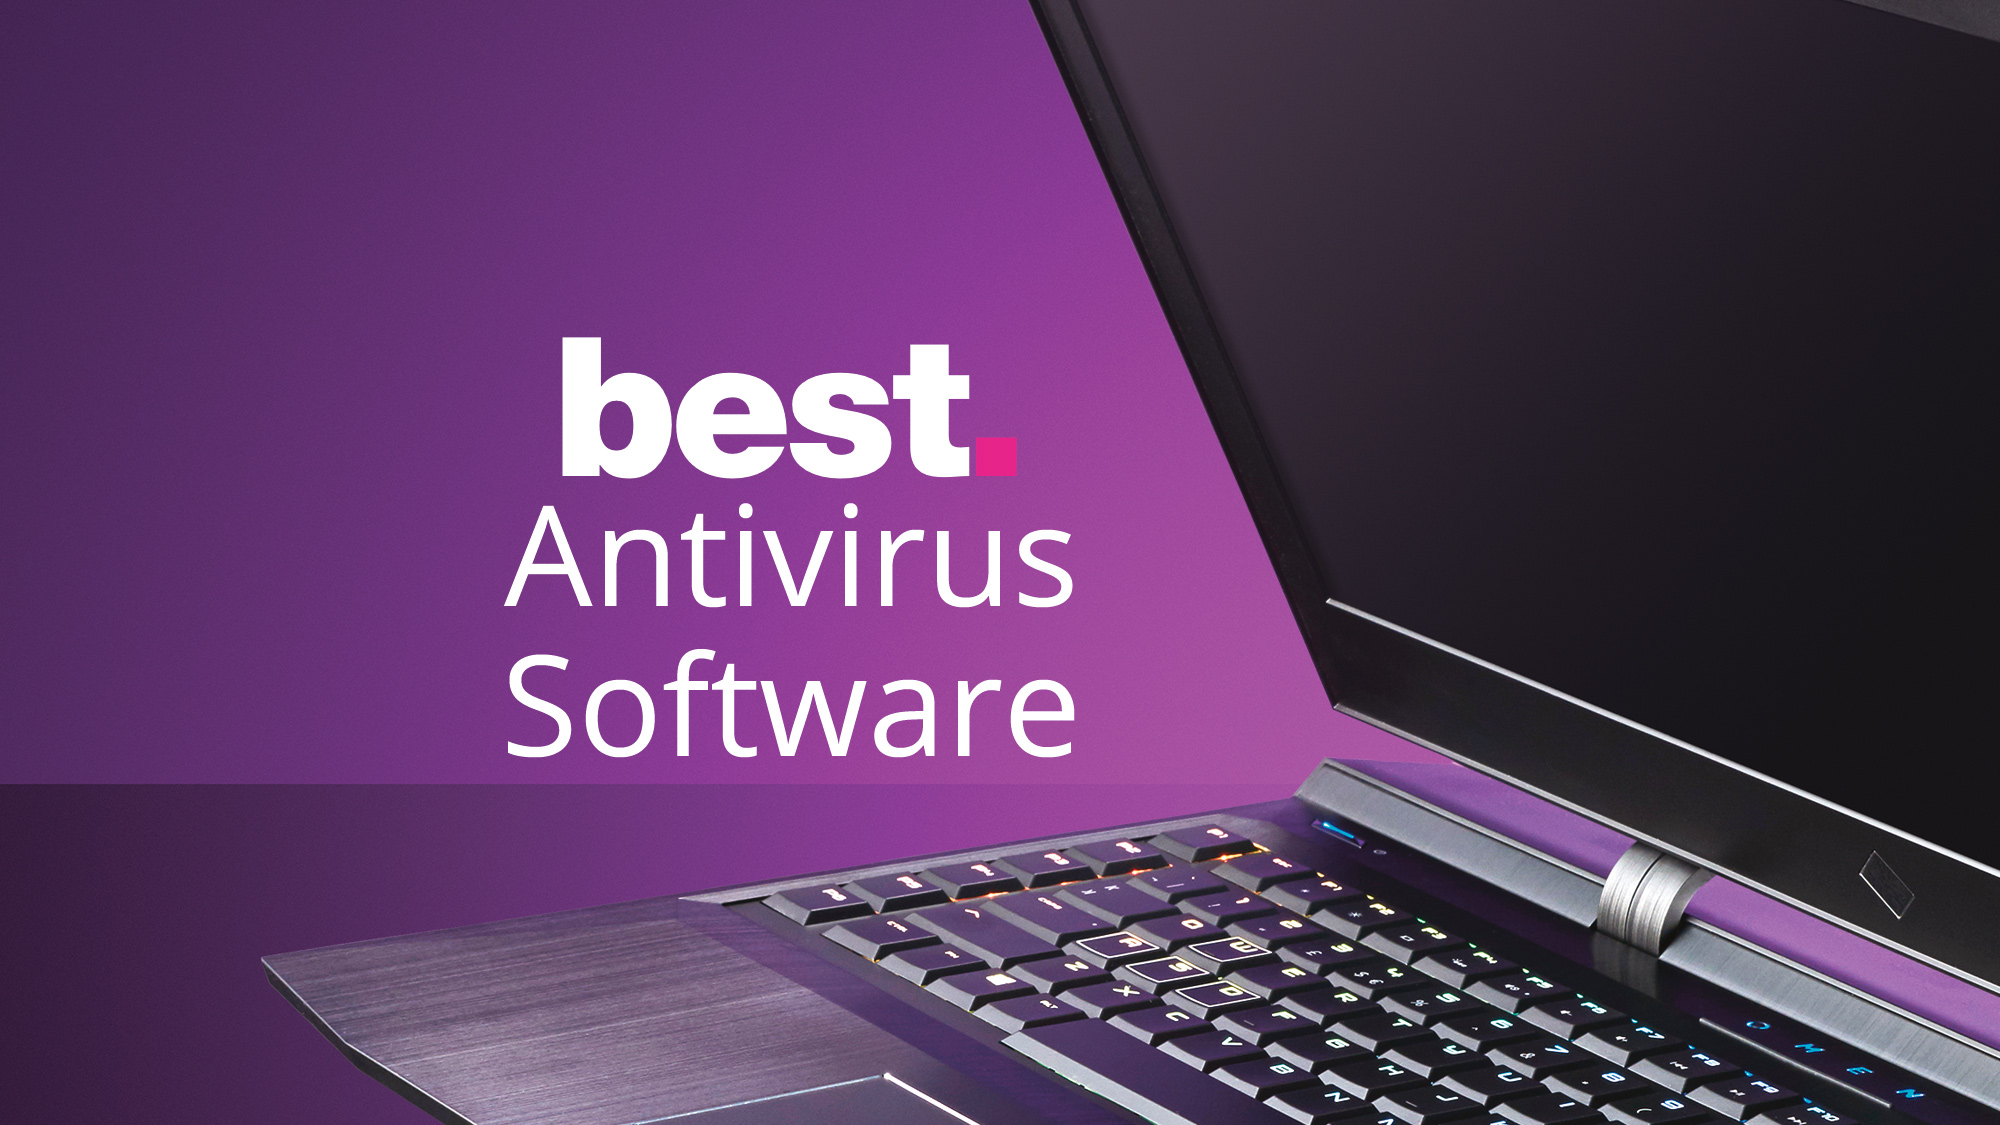 norton antivirus clean sweep for mac, what does it do